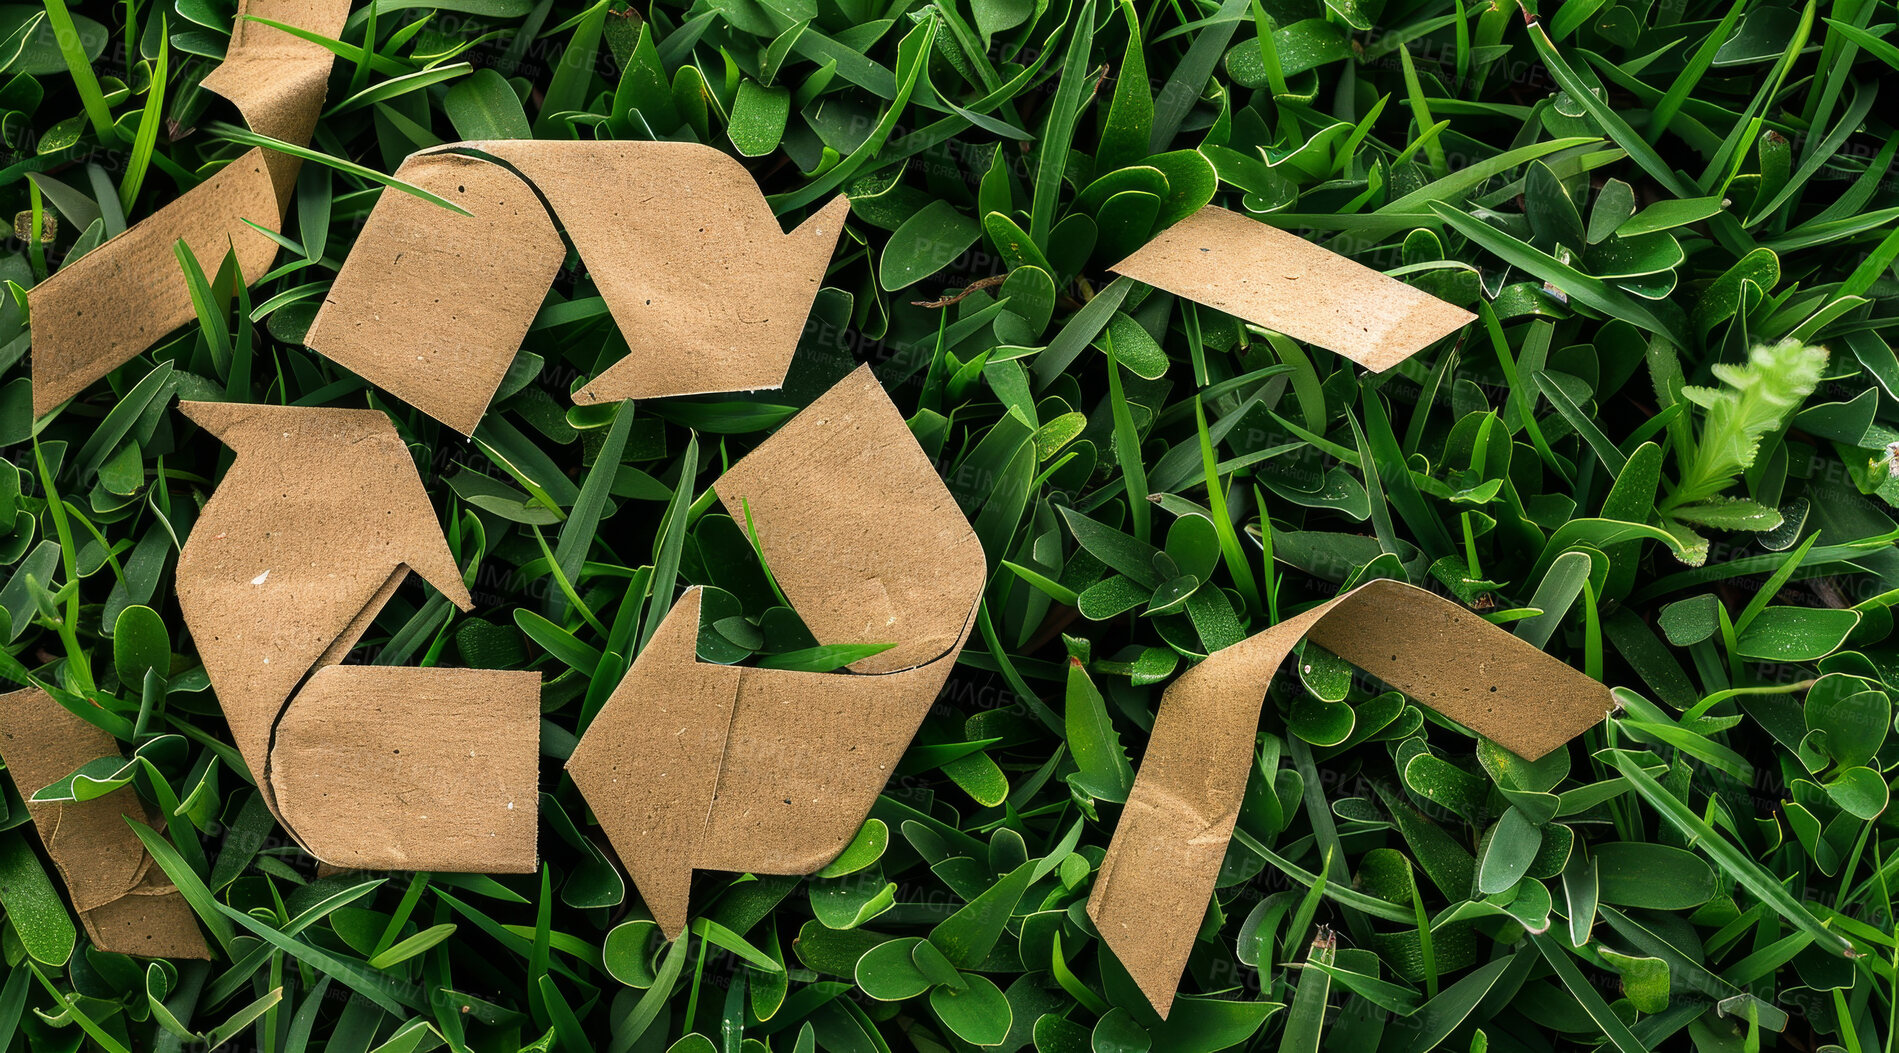 Buy stock photo Recycle, sign and cardboard on nature background for environmental, awareness and sustainability concept. Green grass, mockup and symbol with copyspace for Earth Day, eco system and ecology logo